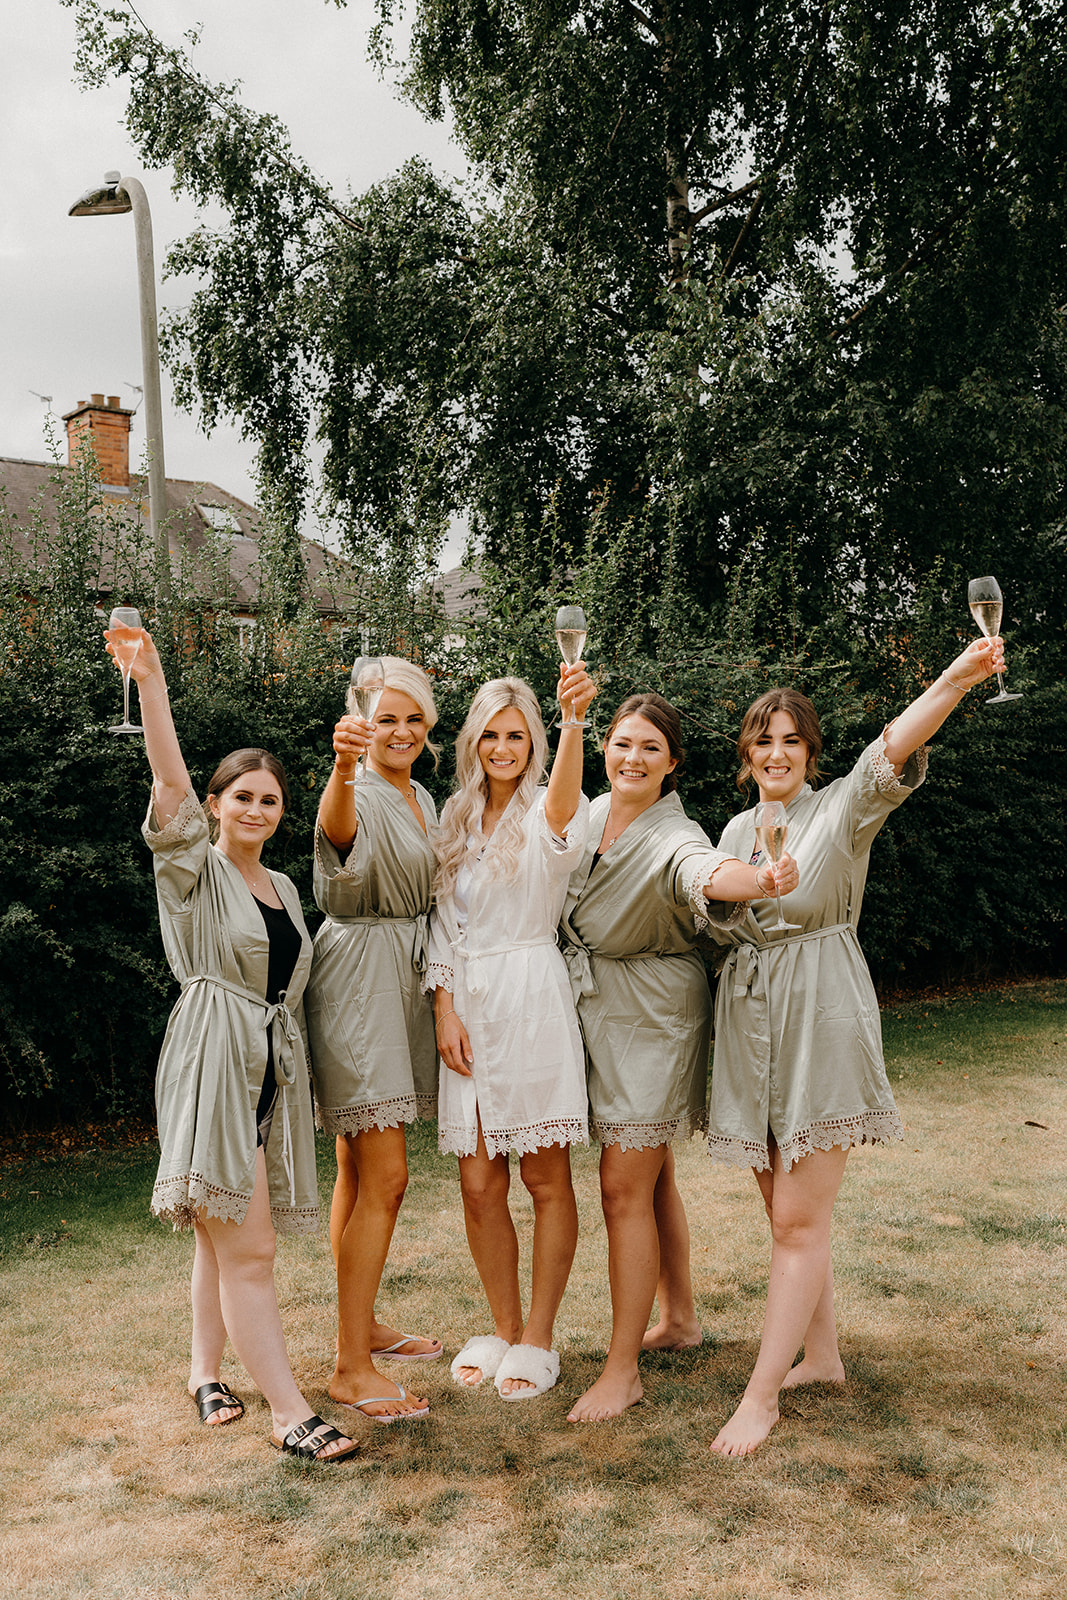 Girls cheering with champagne and celebrating the brides marriage